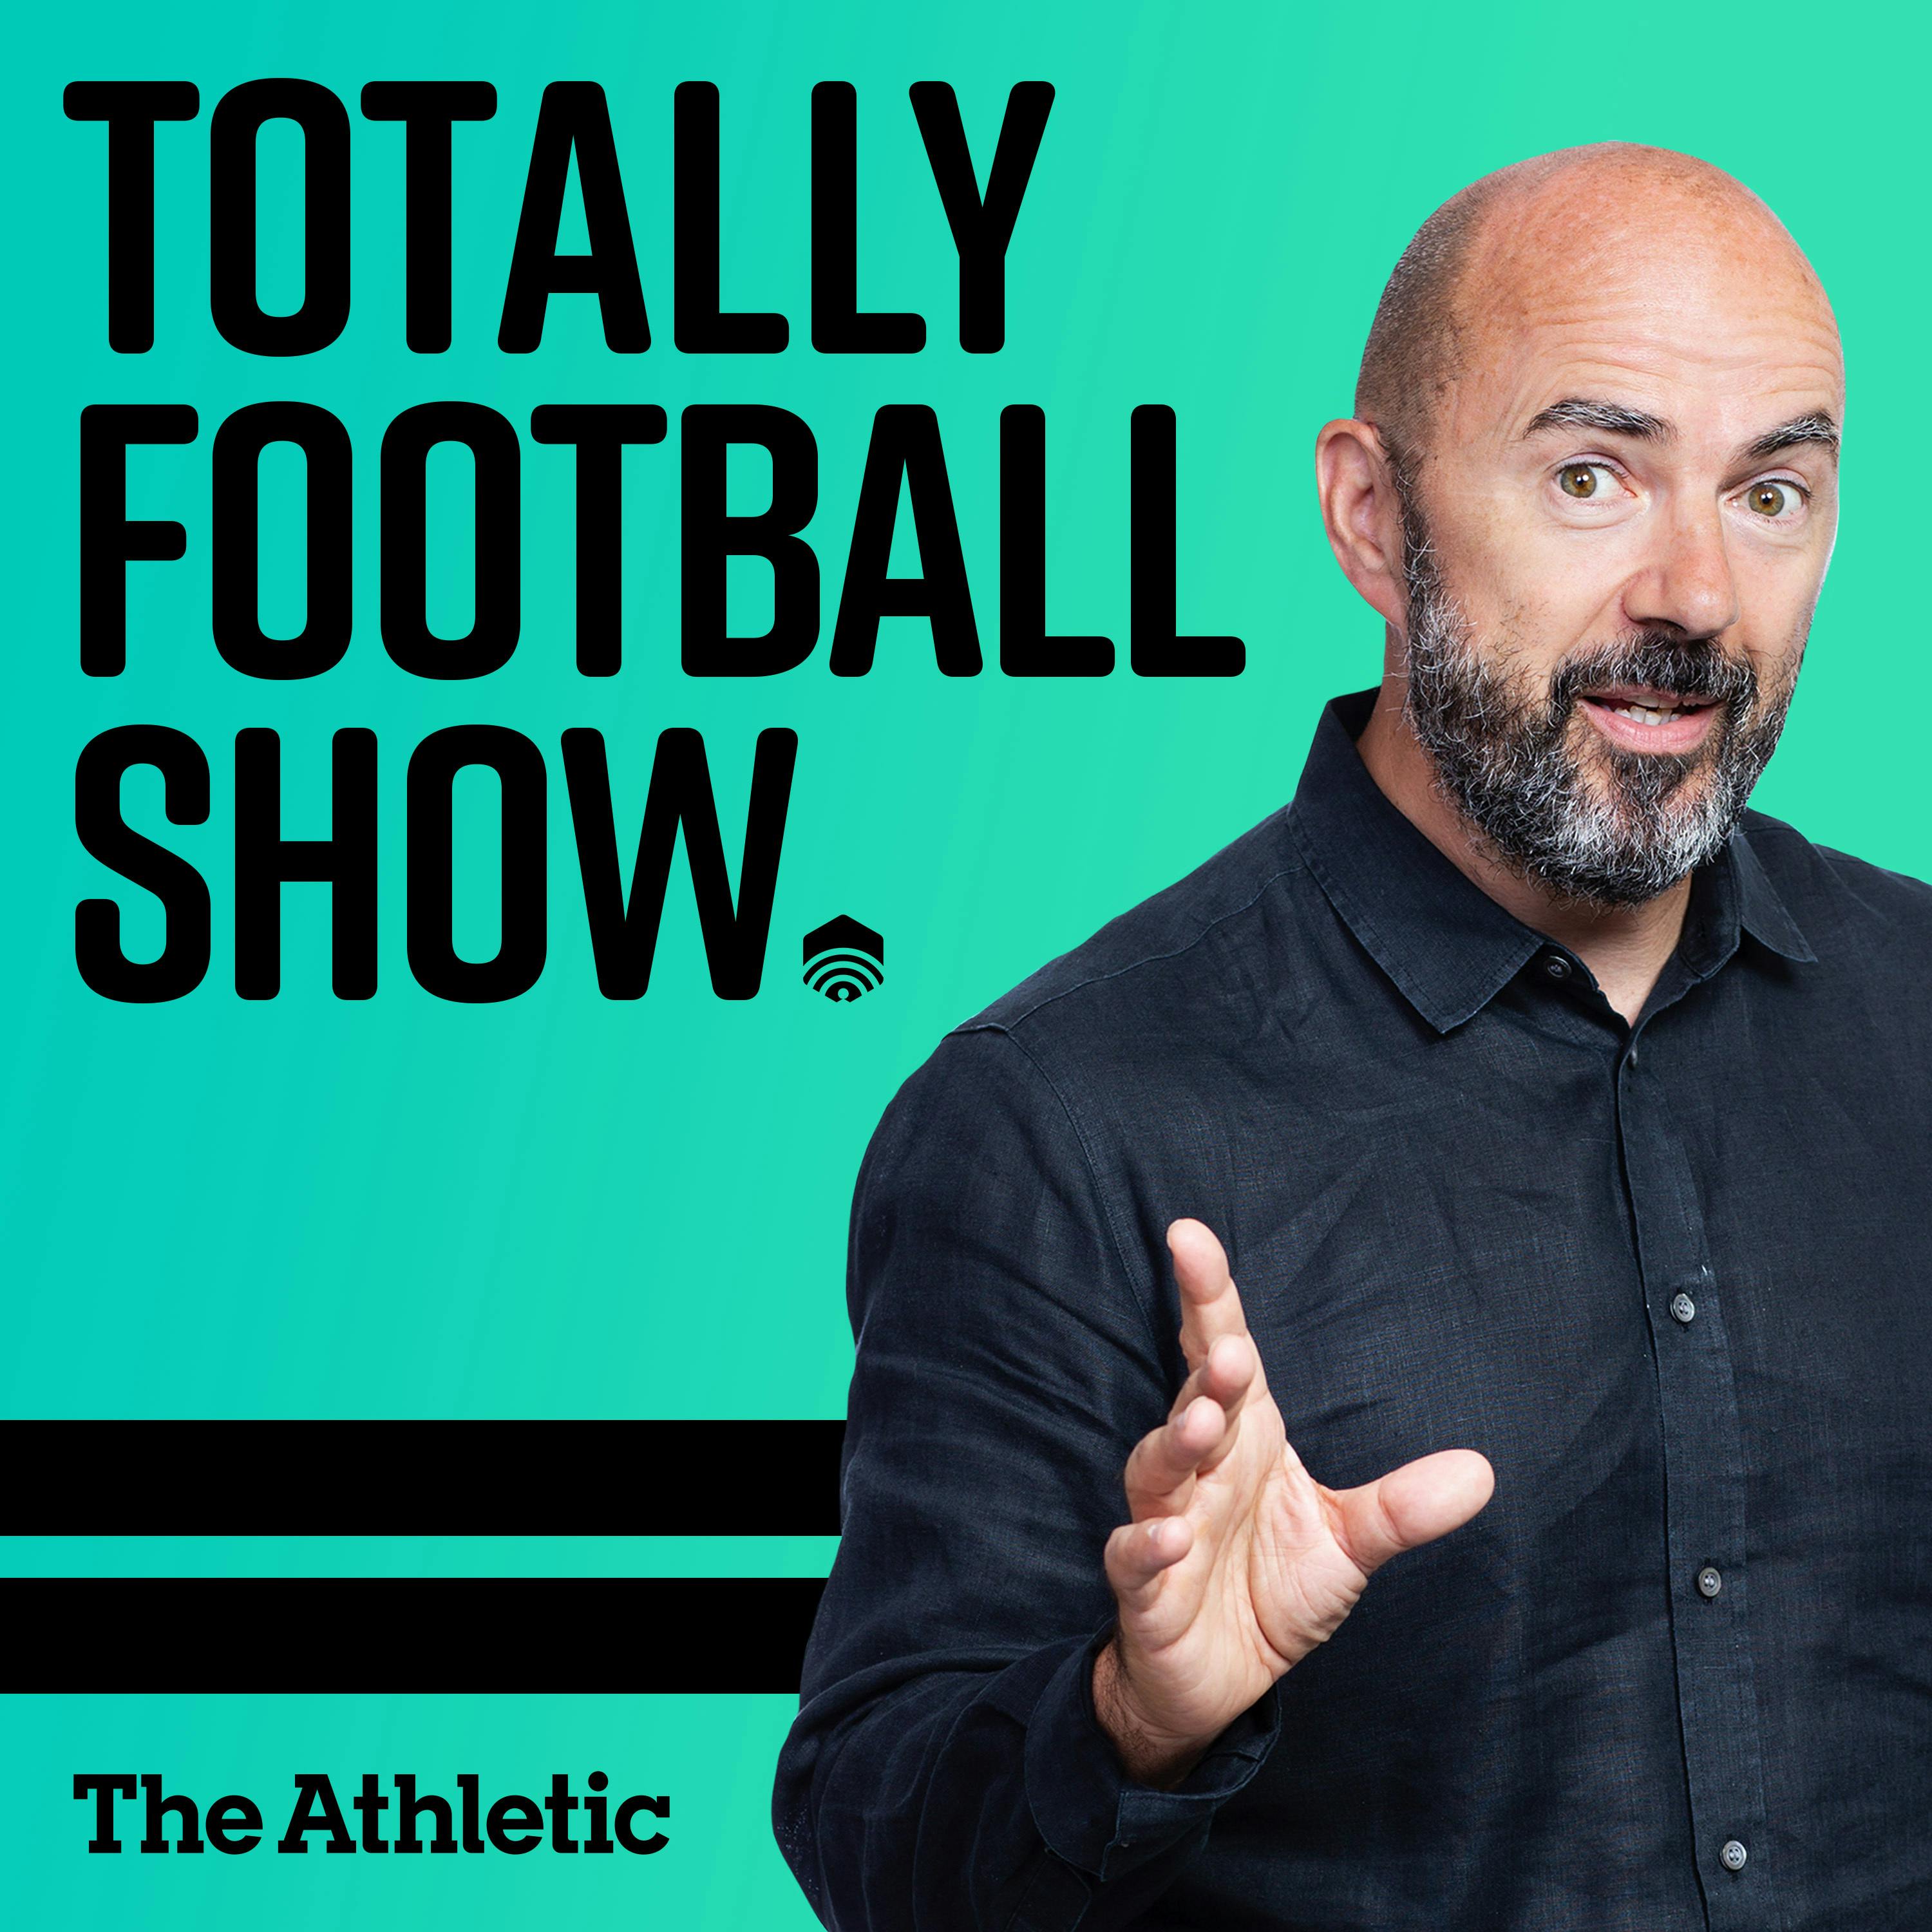 The Totally Football Show with James Richardson podcast show image